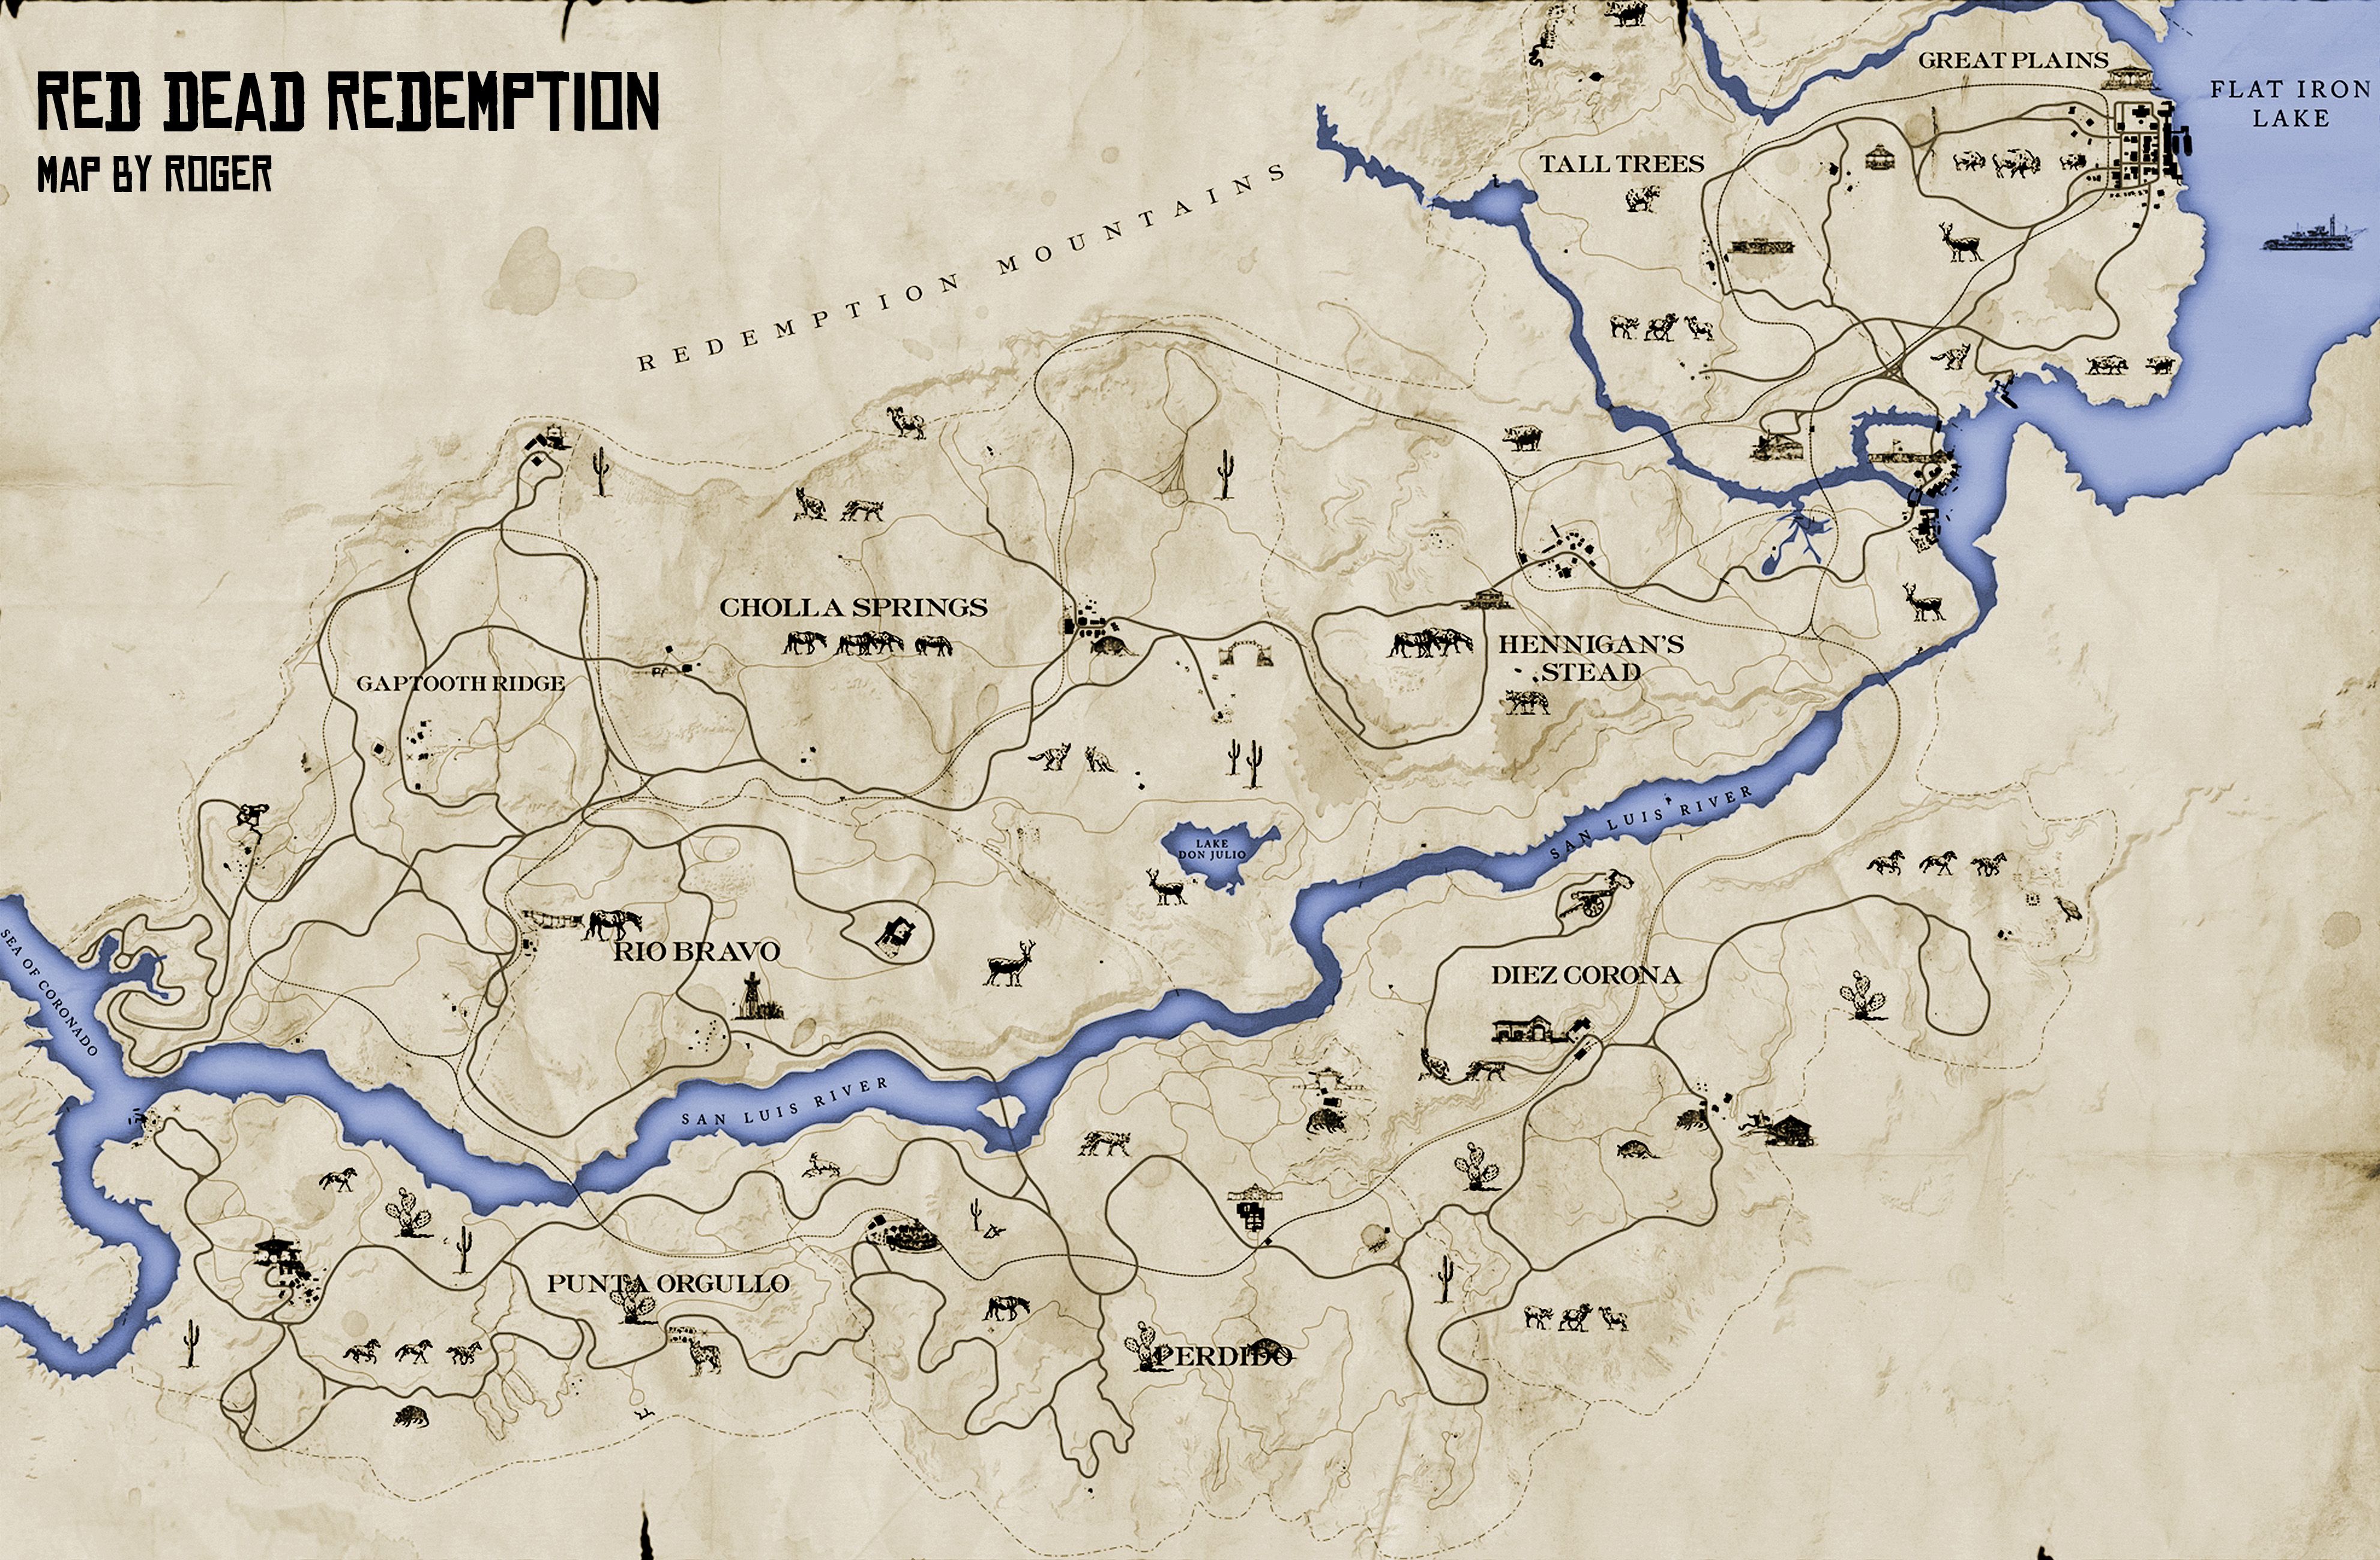 The Original Red Dead Redemption Map in Red Dead 2